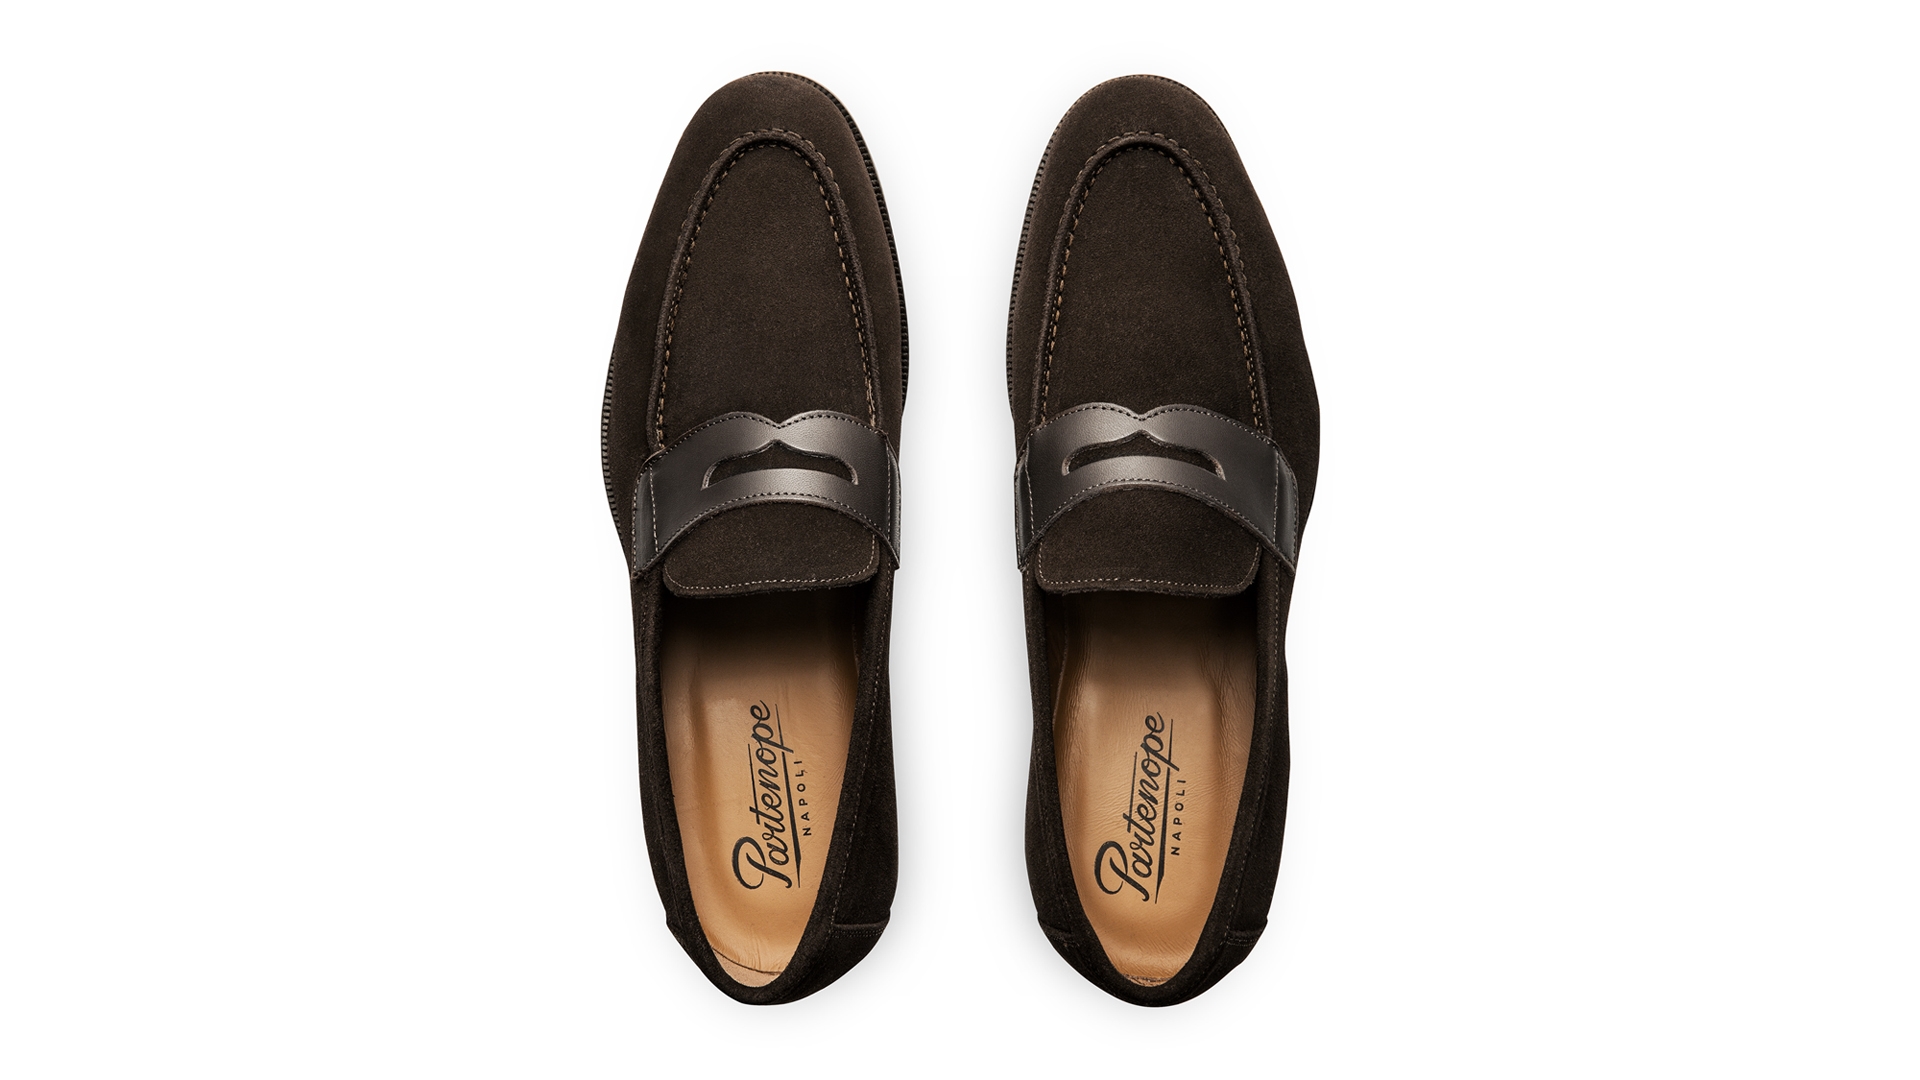 PENNY LOAFERS DARK BROWN SUEDE